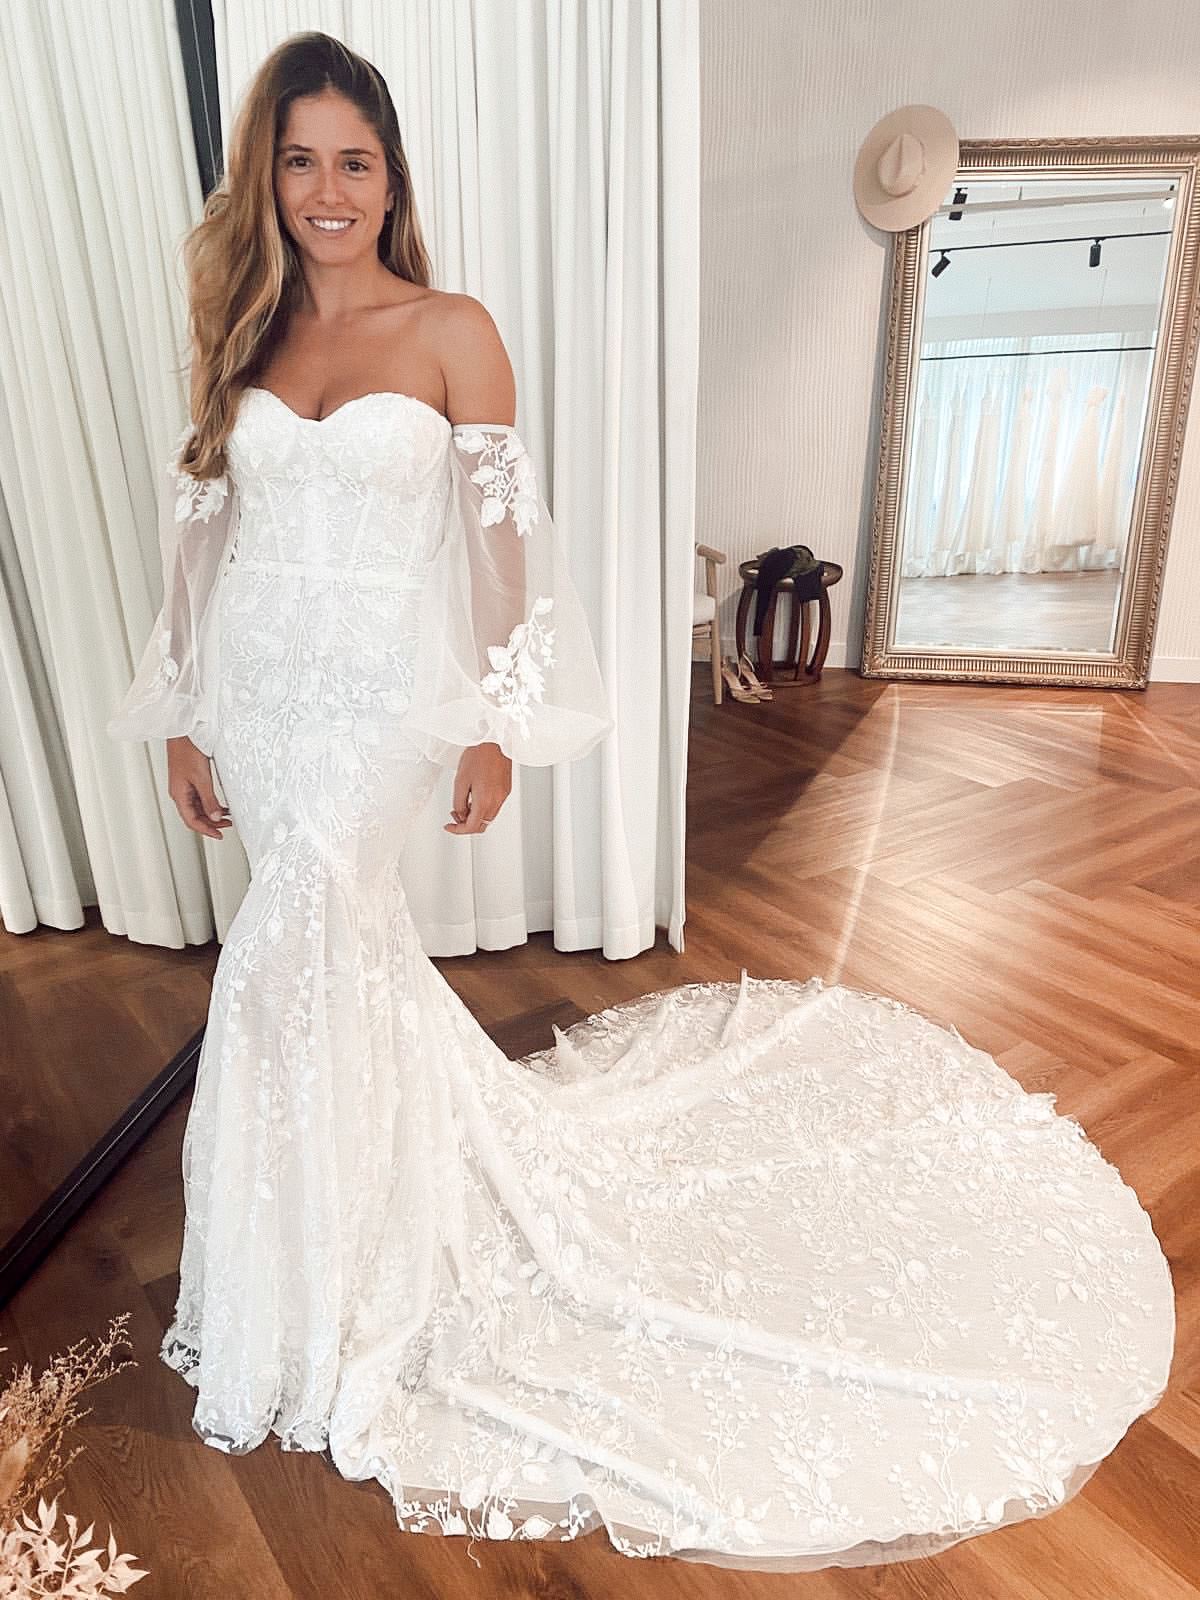 Bride wearing off the shoulder long sleeve wedding dress with balloon sleeves